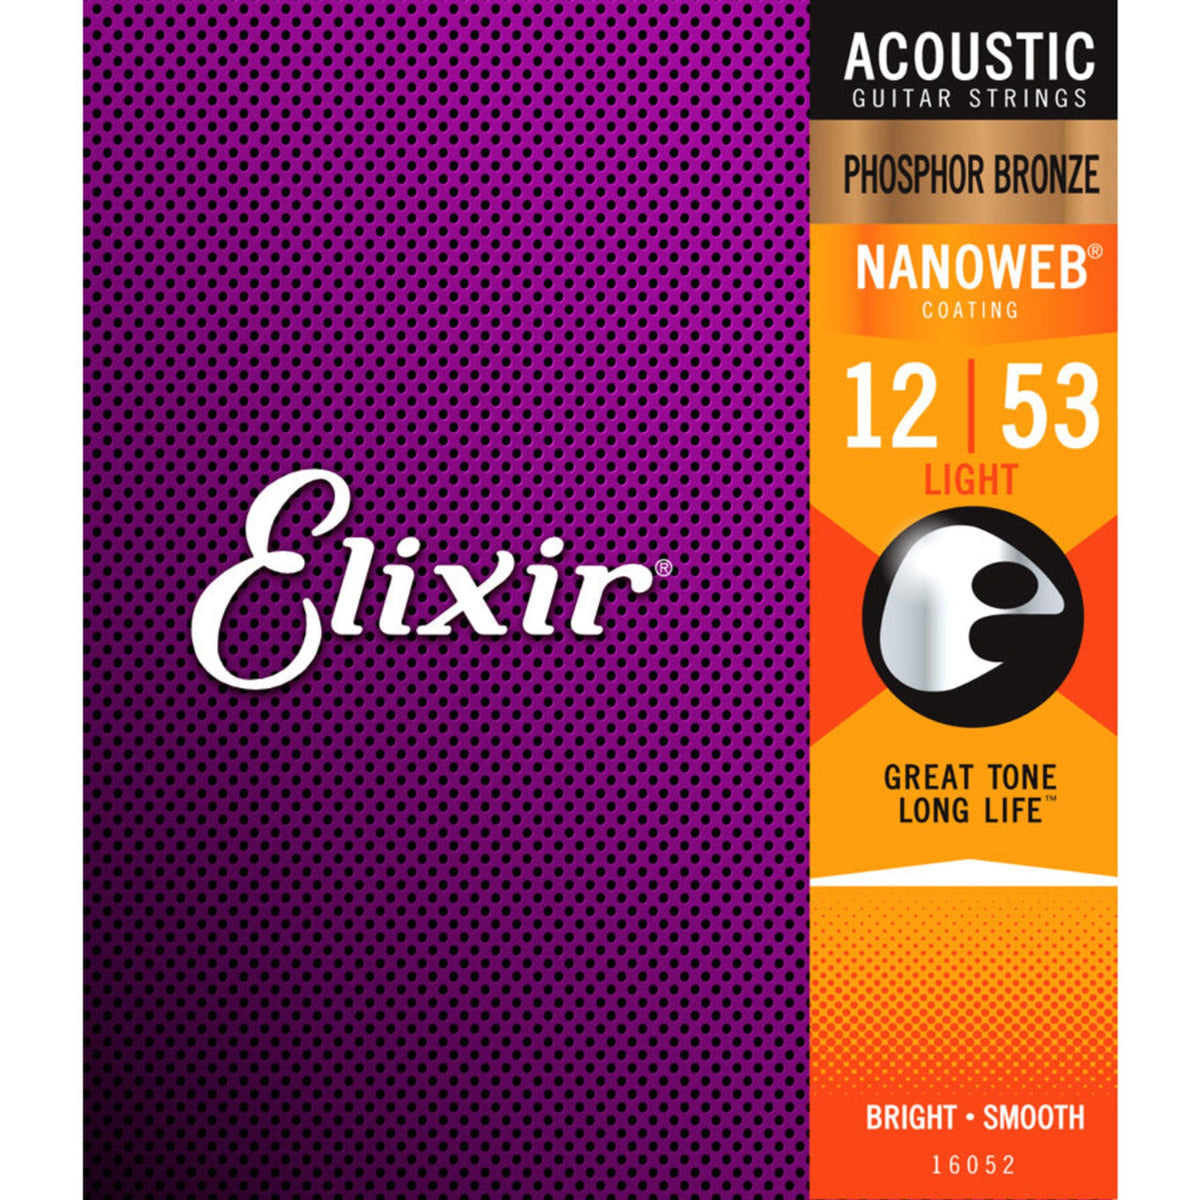 The Elixir 16052 strings are known for their great tone and long life. Elixir strings amp up your guitar’s tone life with the same premium electric guitar strings that experienced players worldwide